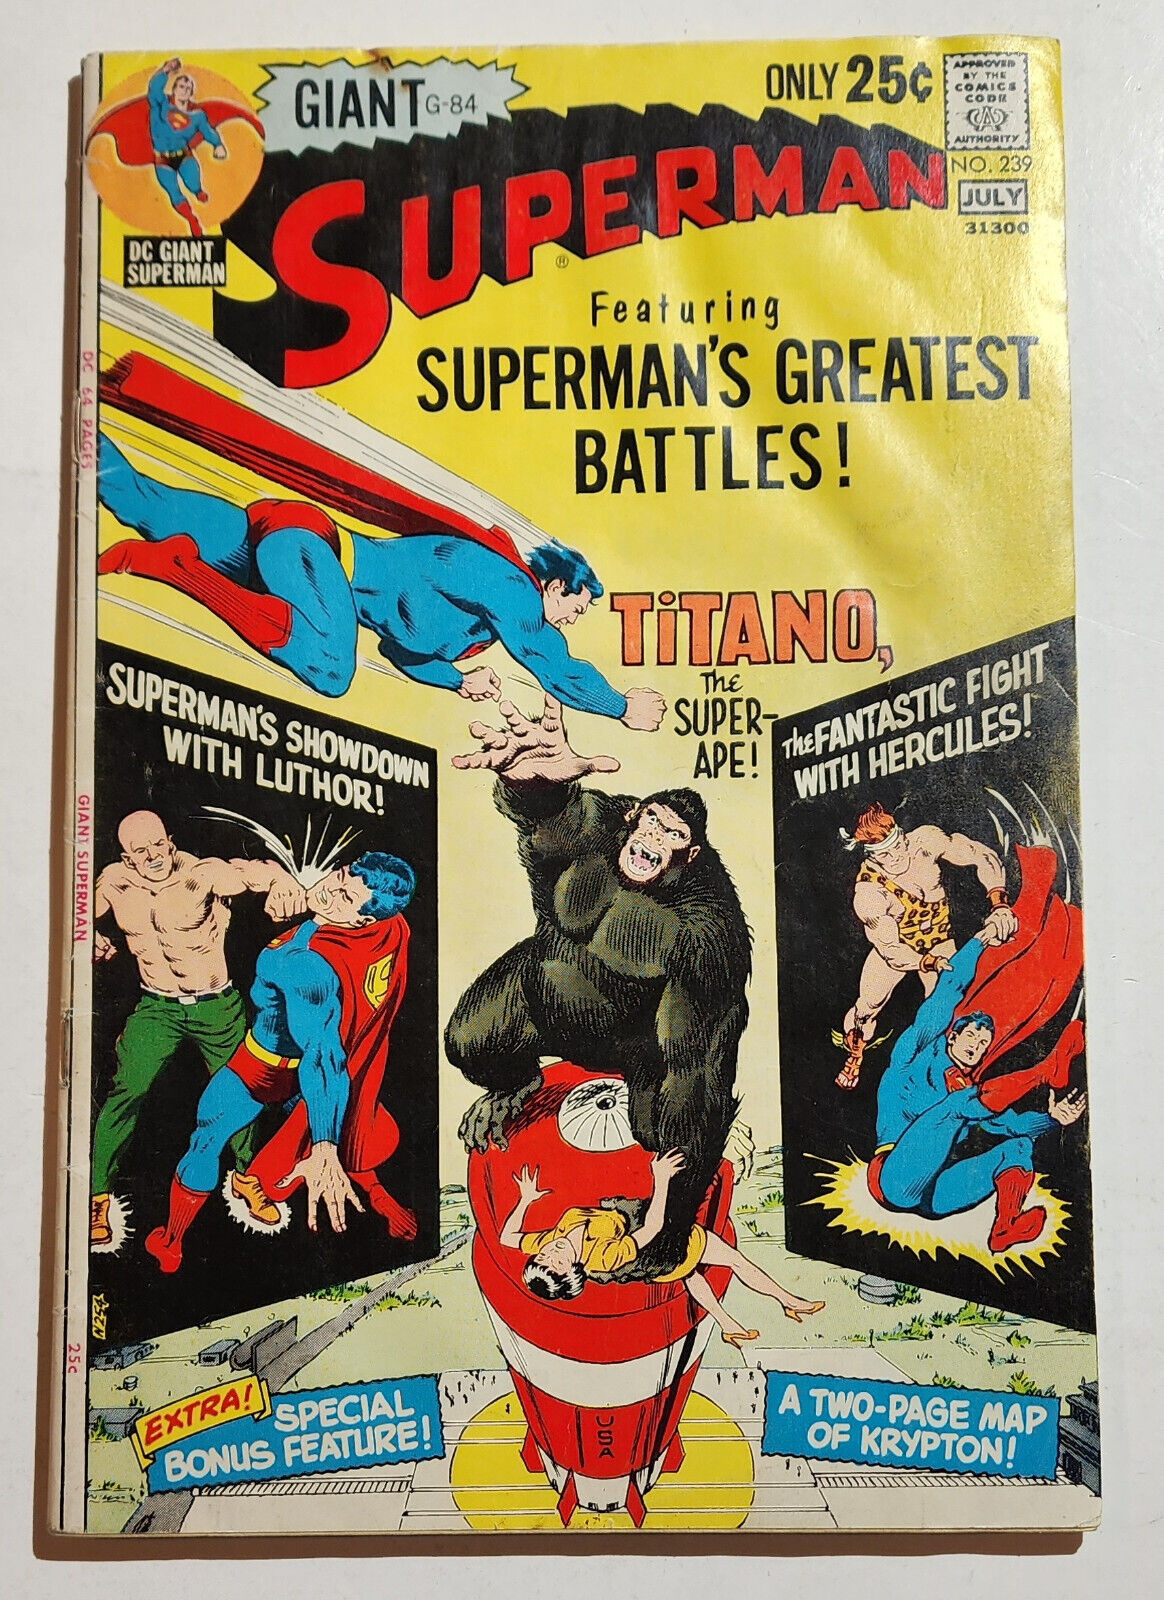 SUPERMAN #239 GIANT G84 1971, I combine shipping